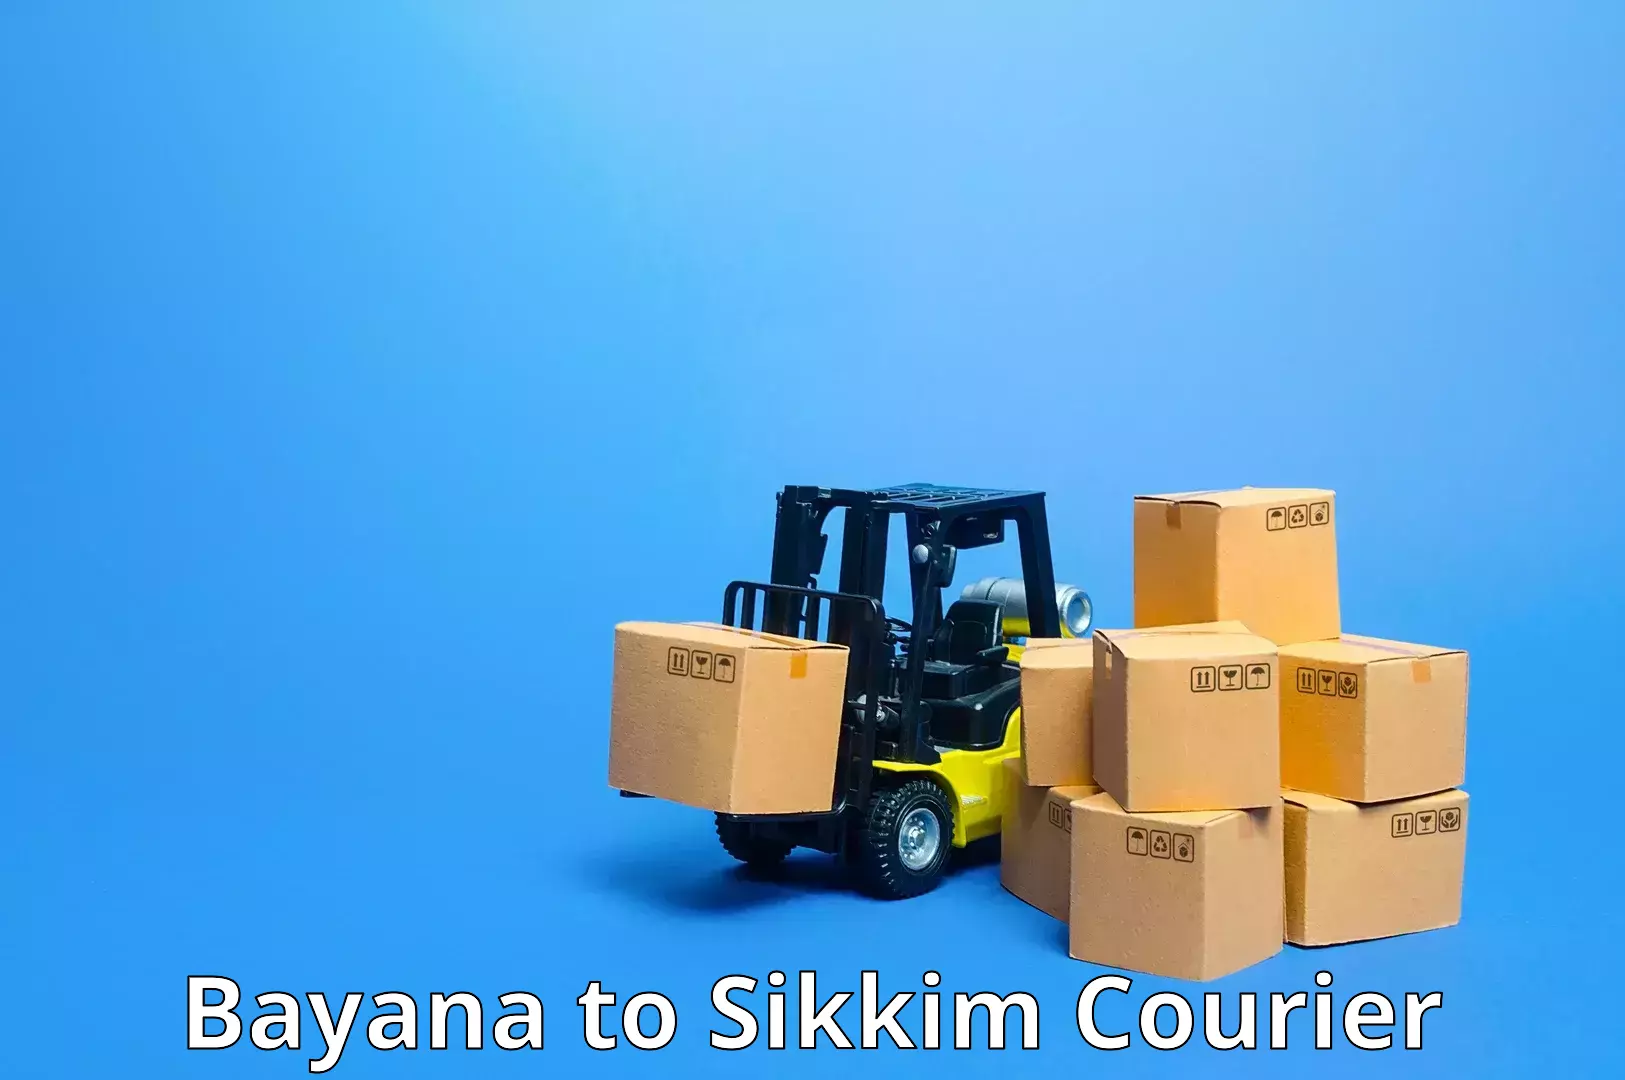 24-hour courier service Bayana to Pelling